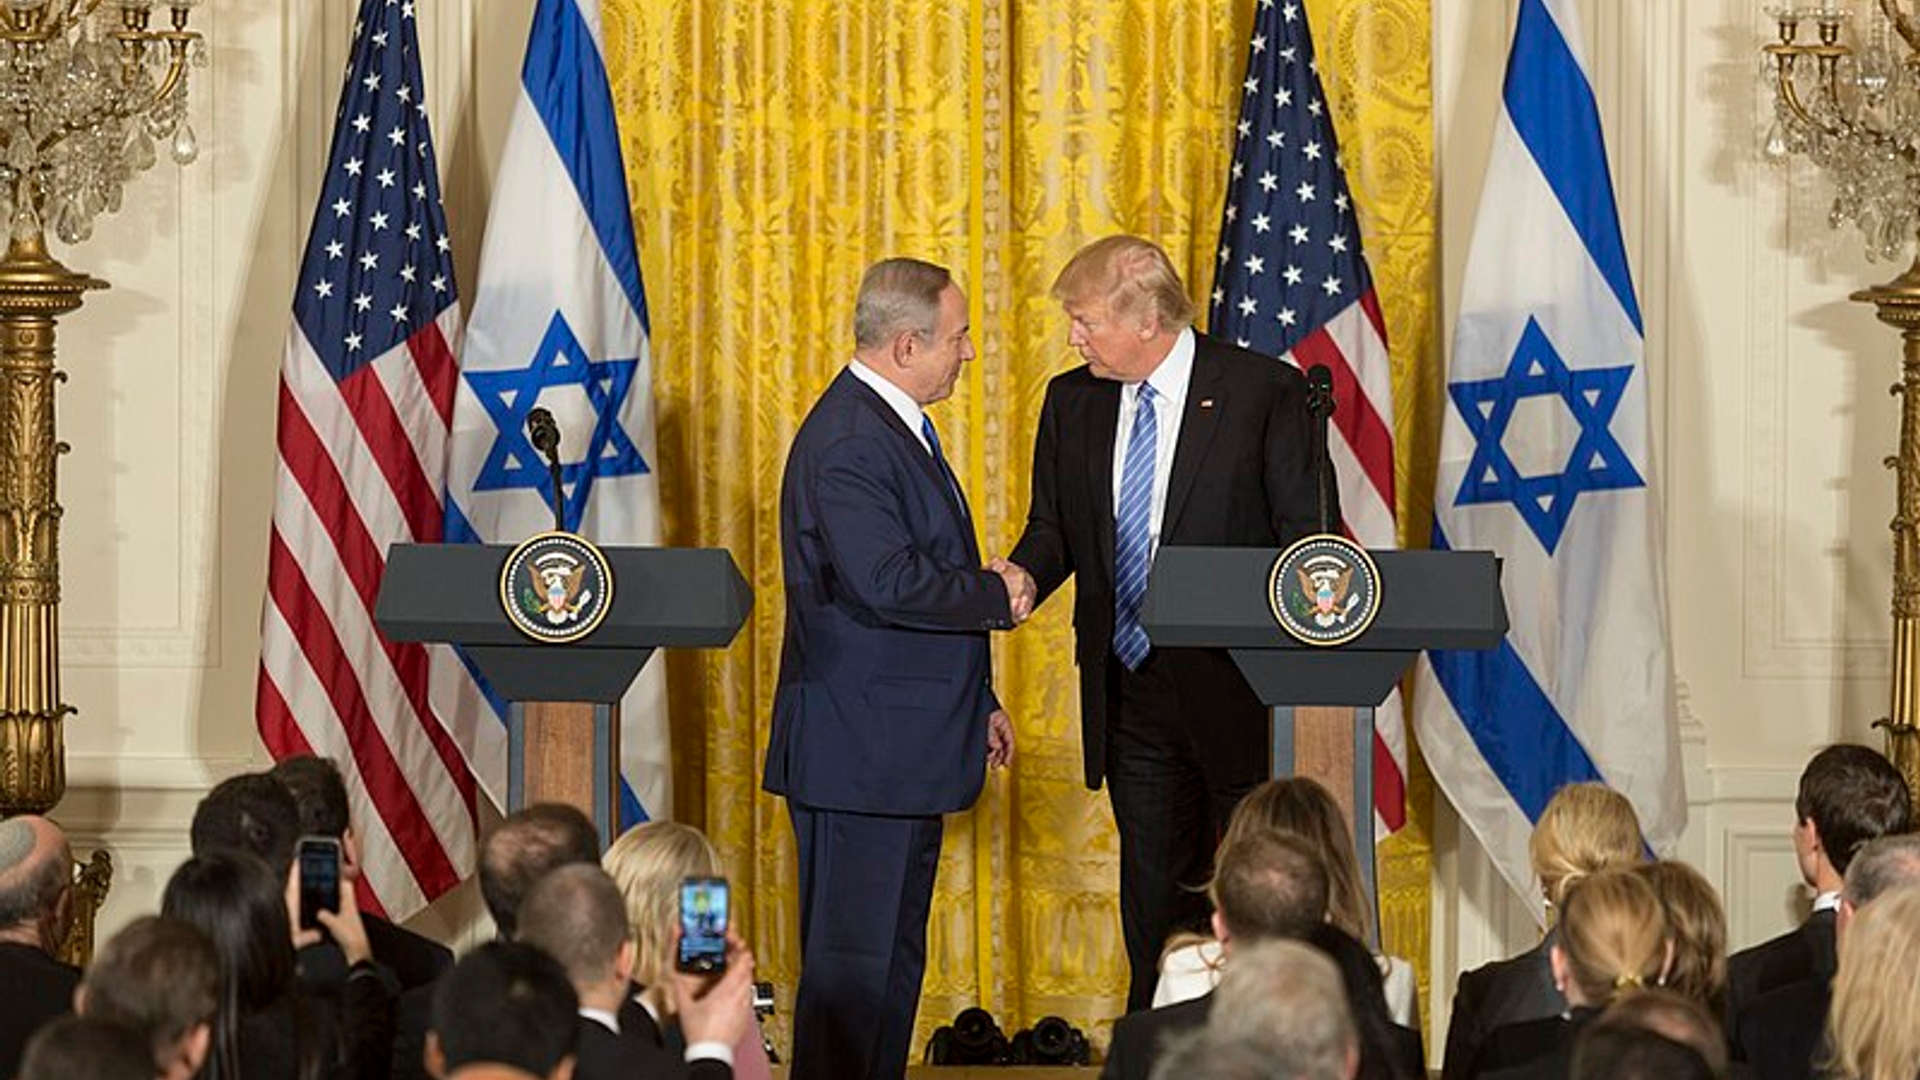 800px-President_Donald_Trump_and_Prime_Minister_Benjamin_Netanyahu_Joint_Press_Conference,_February_15,_2017_(02)